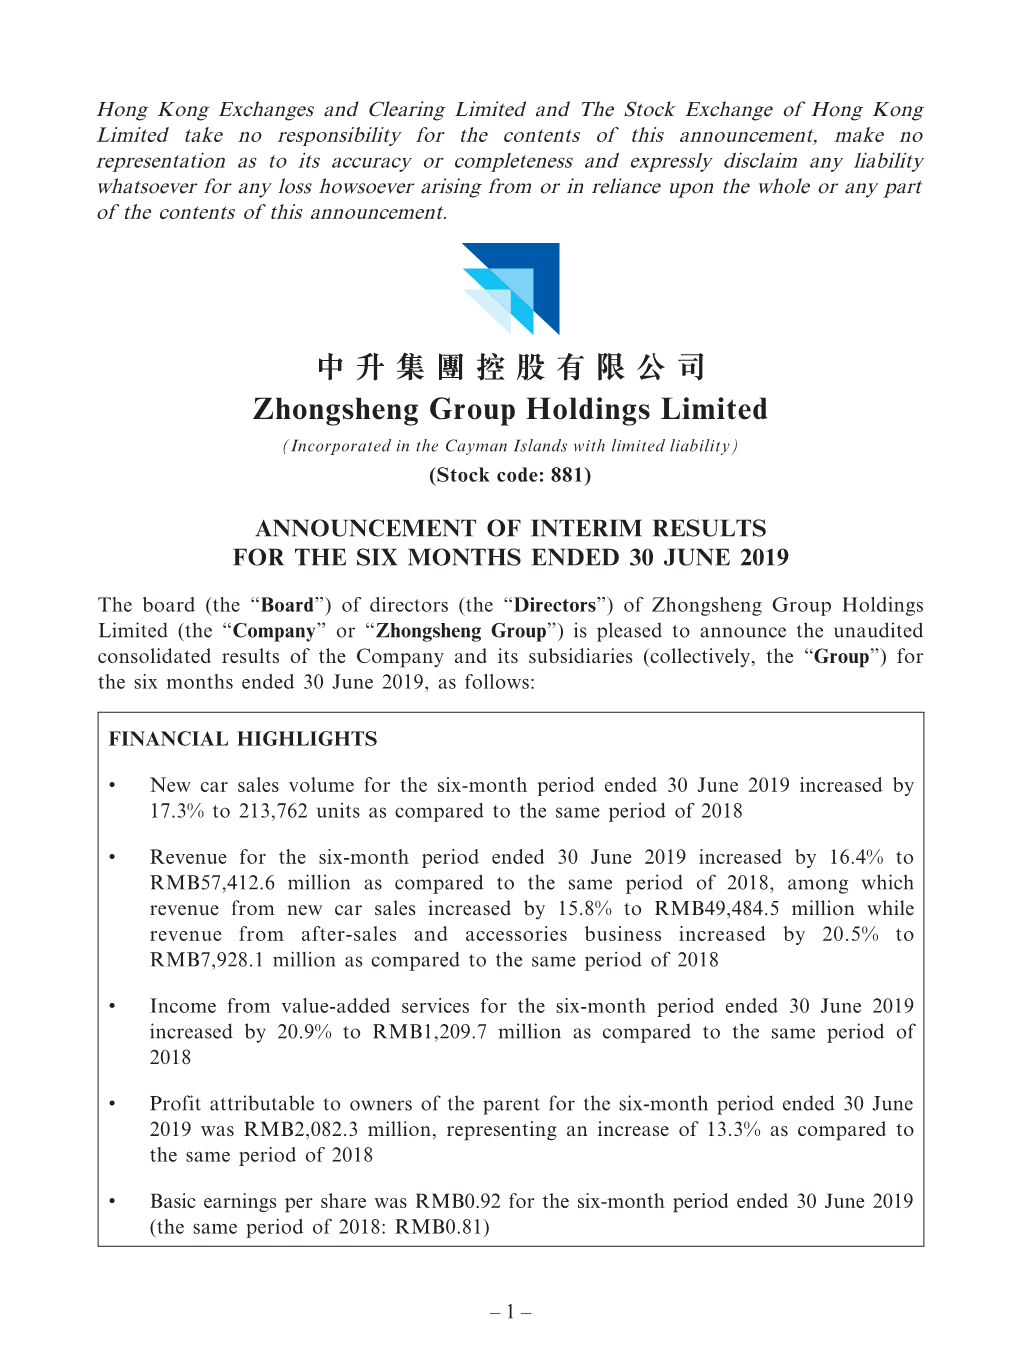 Zhongsheng Group Holdings Limited (Incorporated in the Cayman Islands with Limited Liability) (Stock Code: 881)